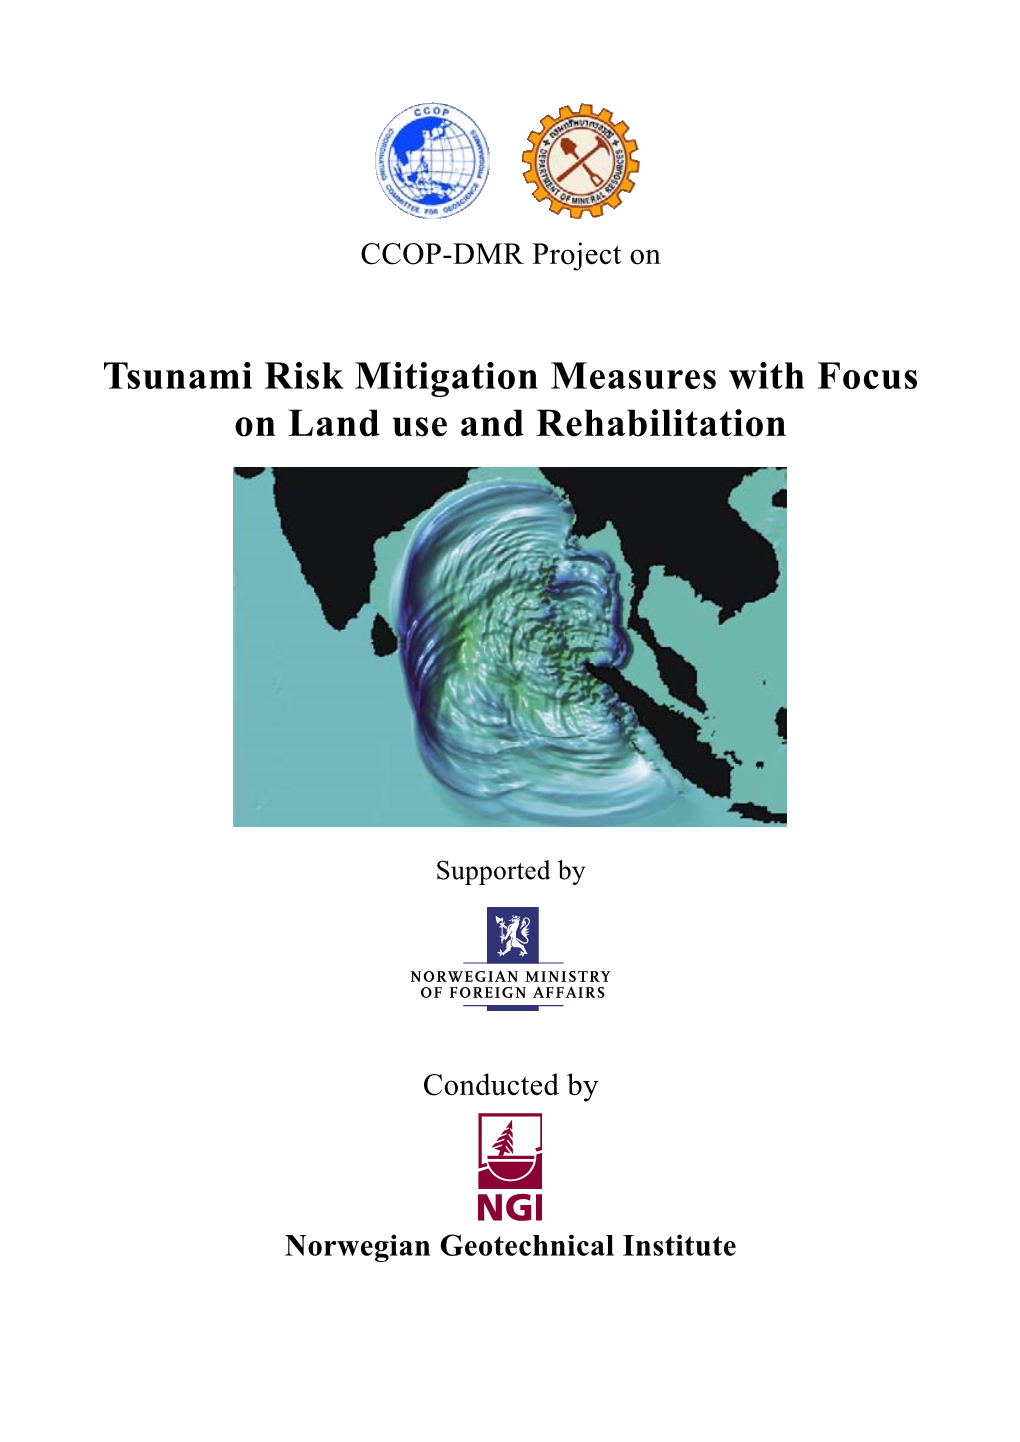 Tsunami Risk Mitigation Measures with Focus on Land Use and Rehabilitation